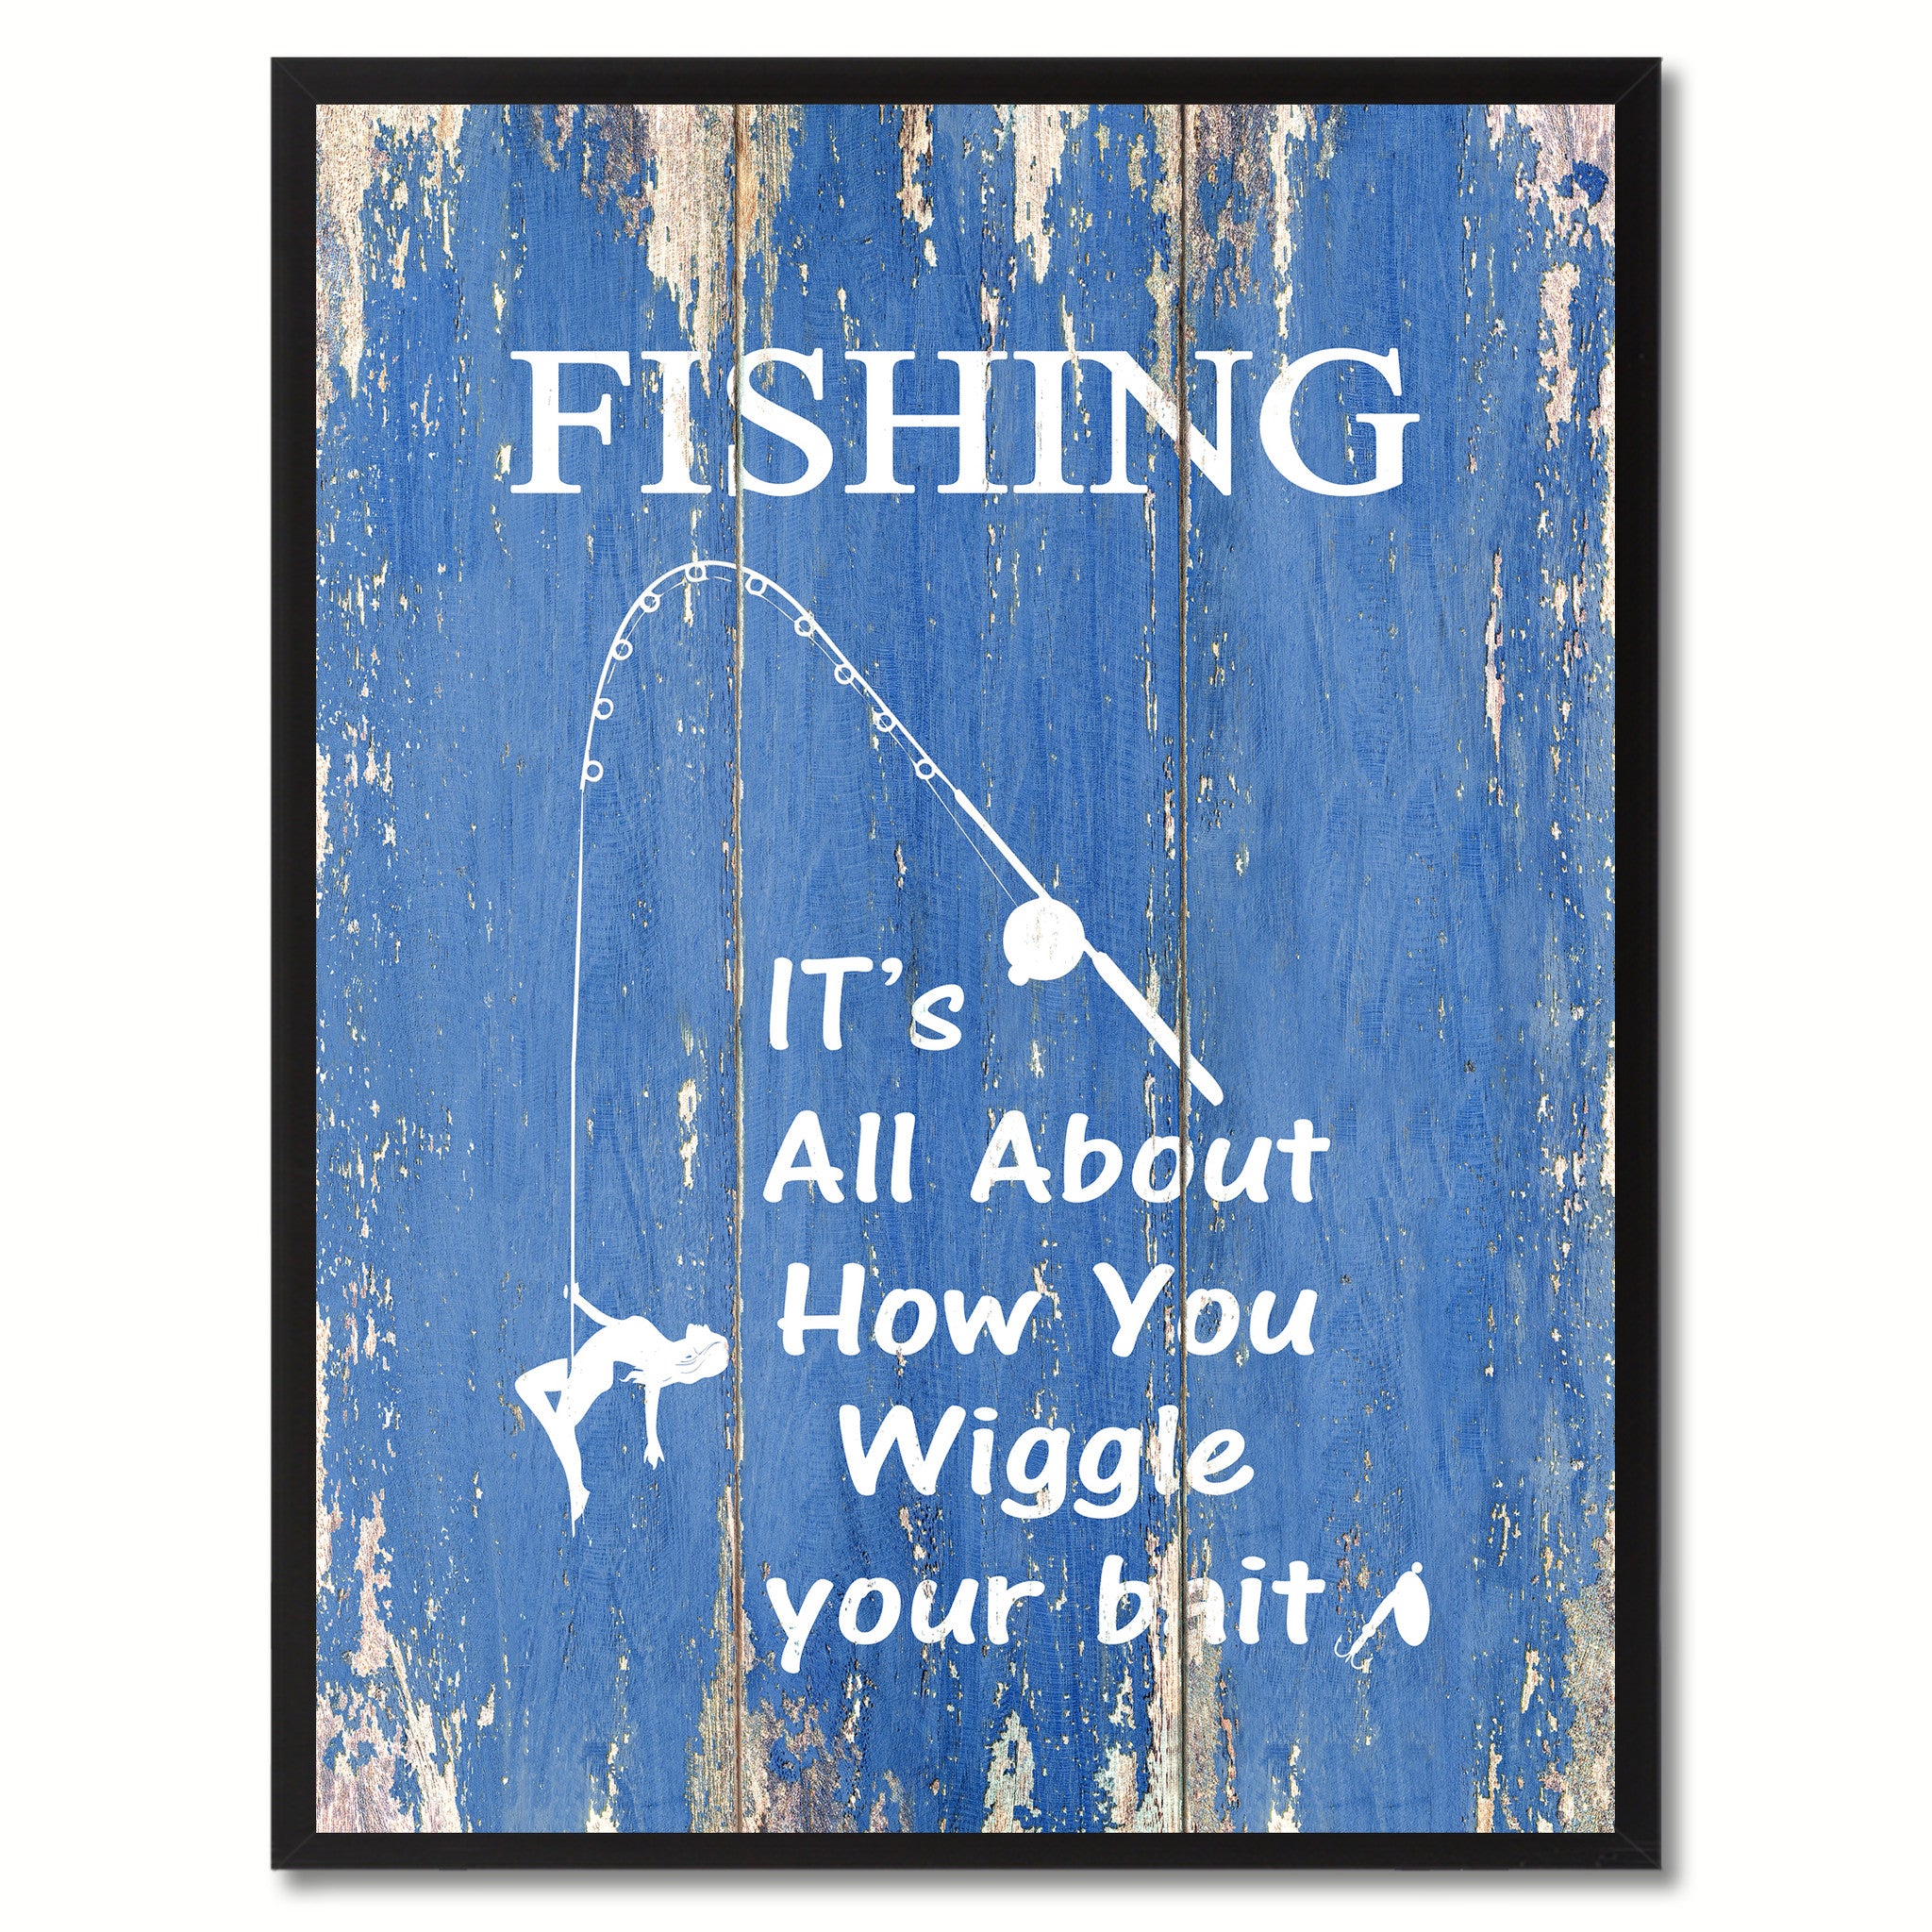 Fishing It's All About How You Wiggle Your Bait Saying Canvas Print, Black Picture Frame Home Decor Wall Art Gifts